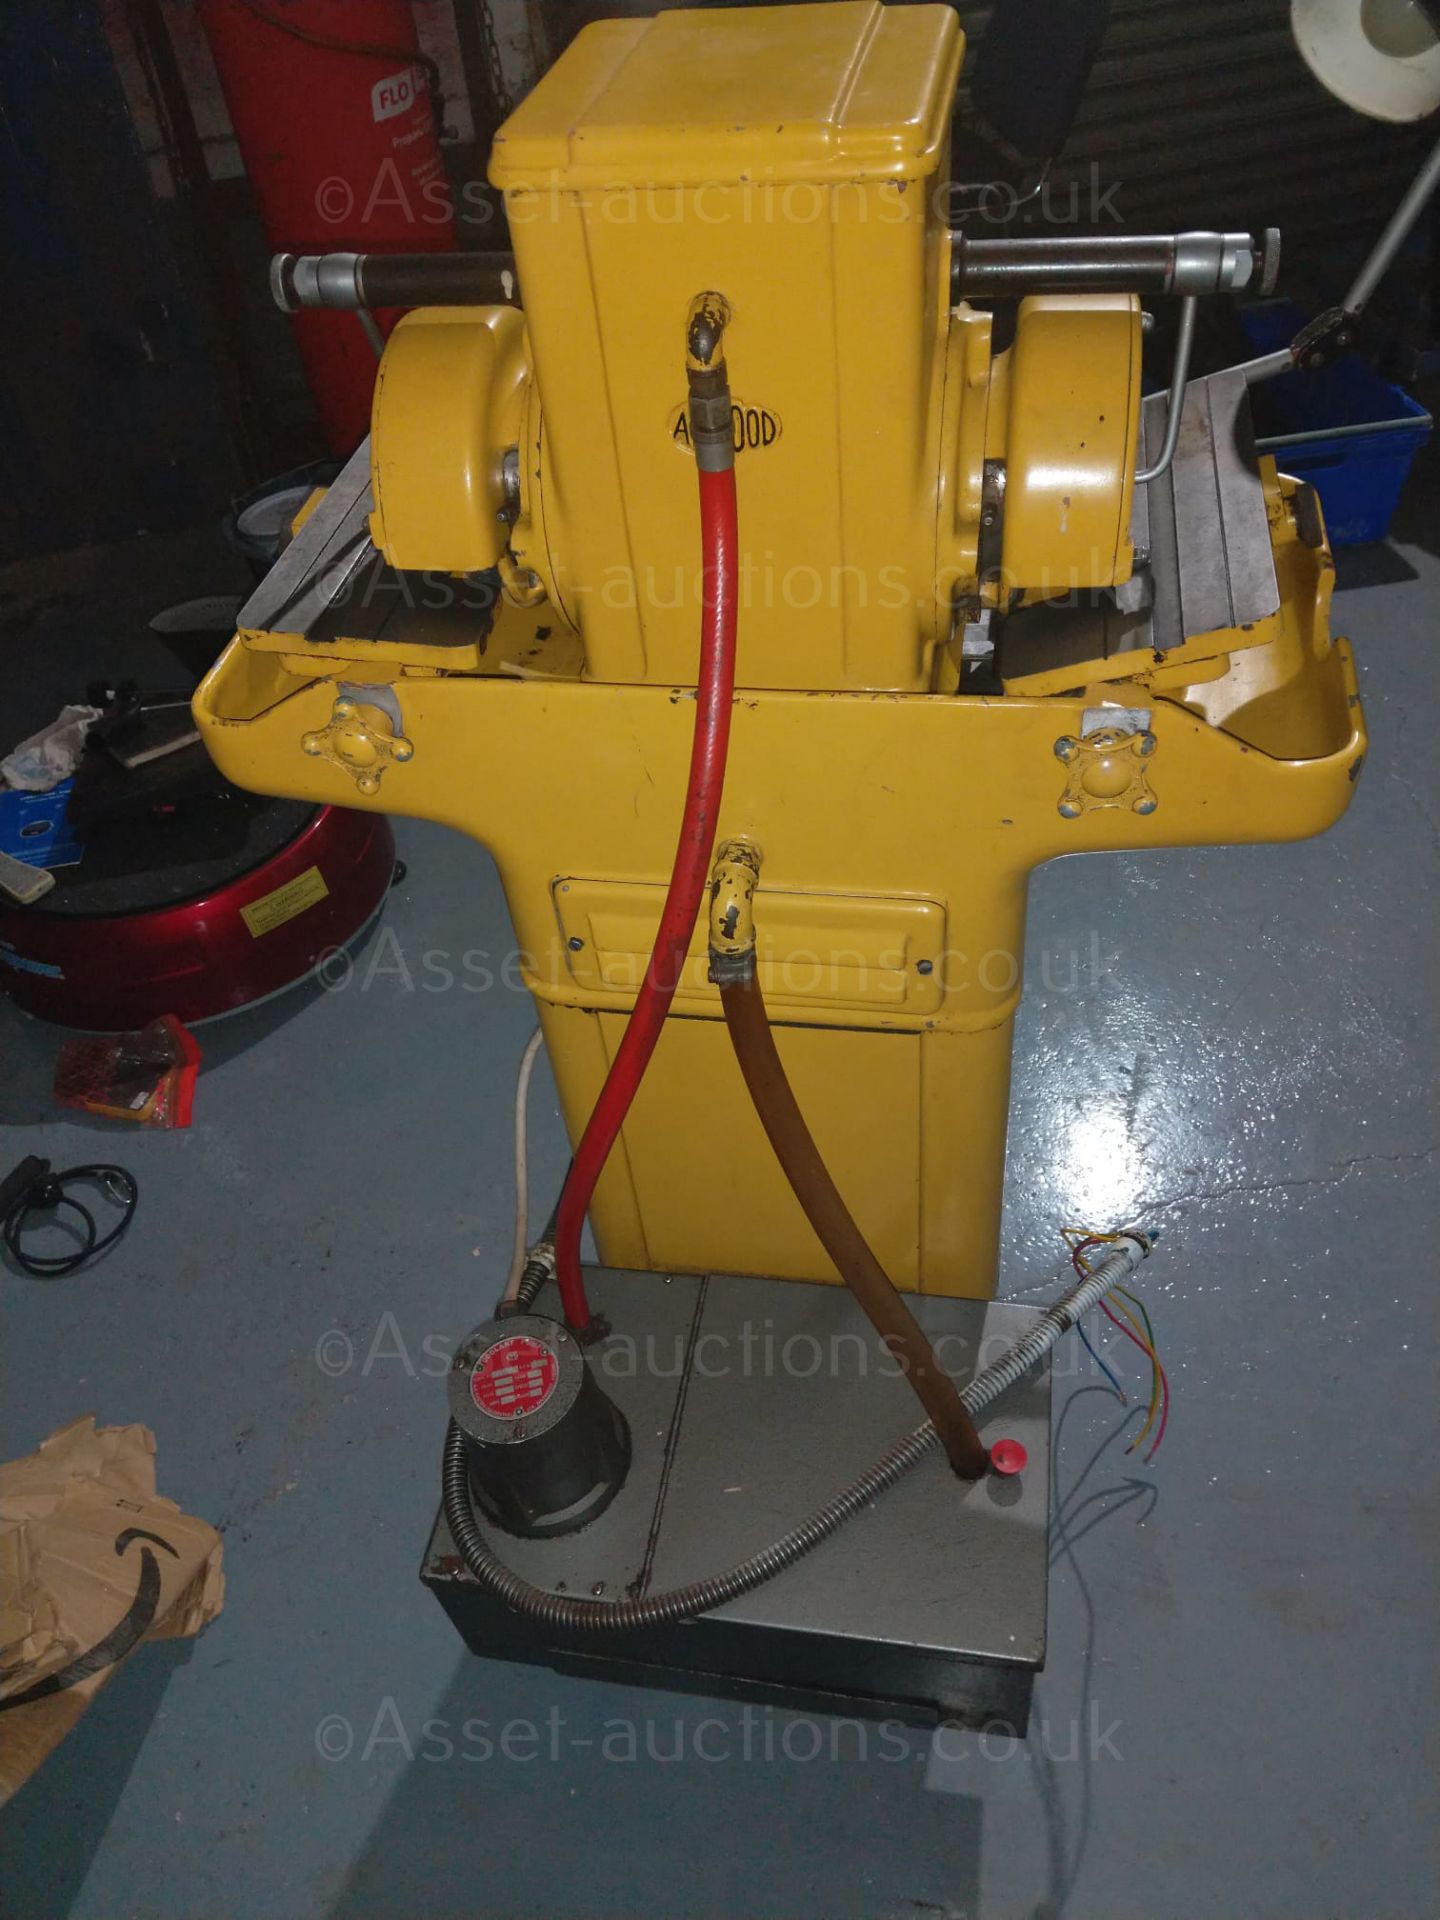 ABWOOD TOOL GRINDER LAPPING MACHINE, DOUBLE HEADED, COOLANT TANK, IN GOOD WORKIN GORDER *NO VAT* - Image 3 of 6